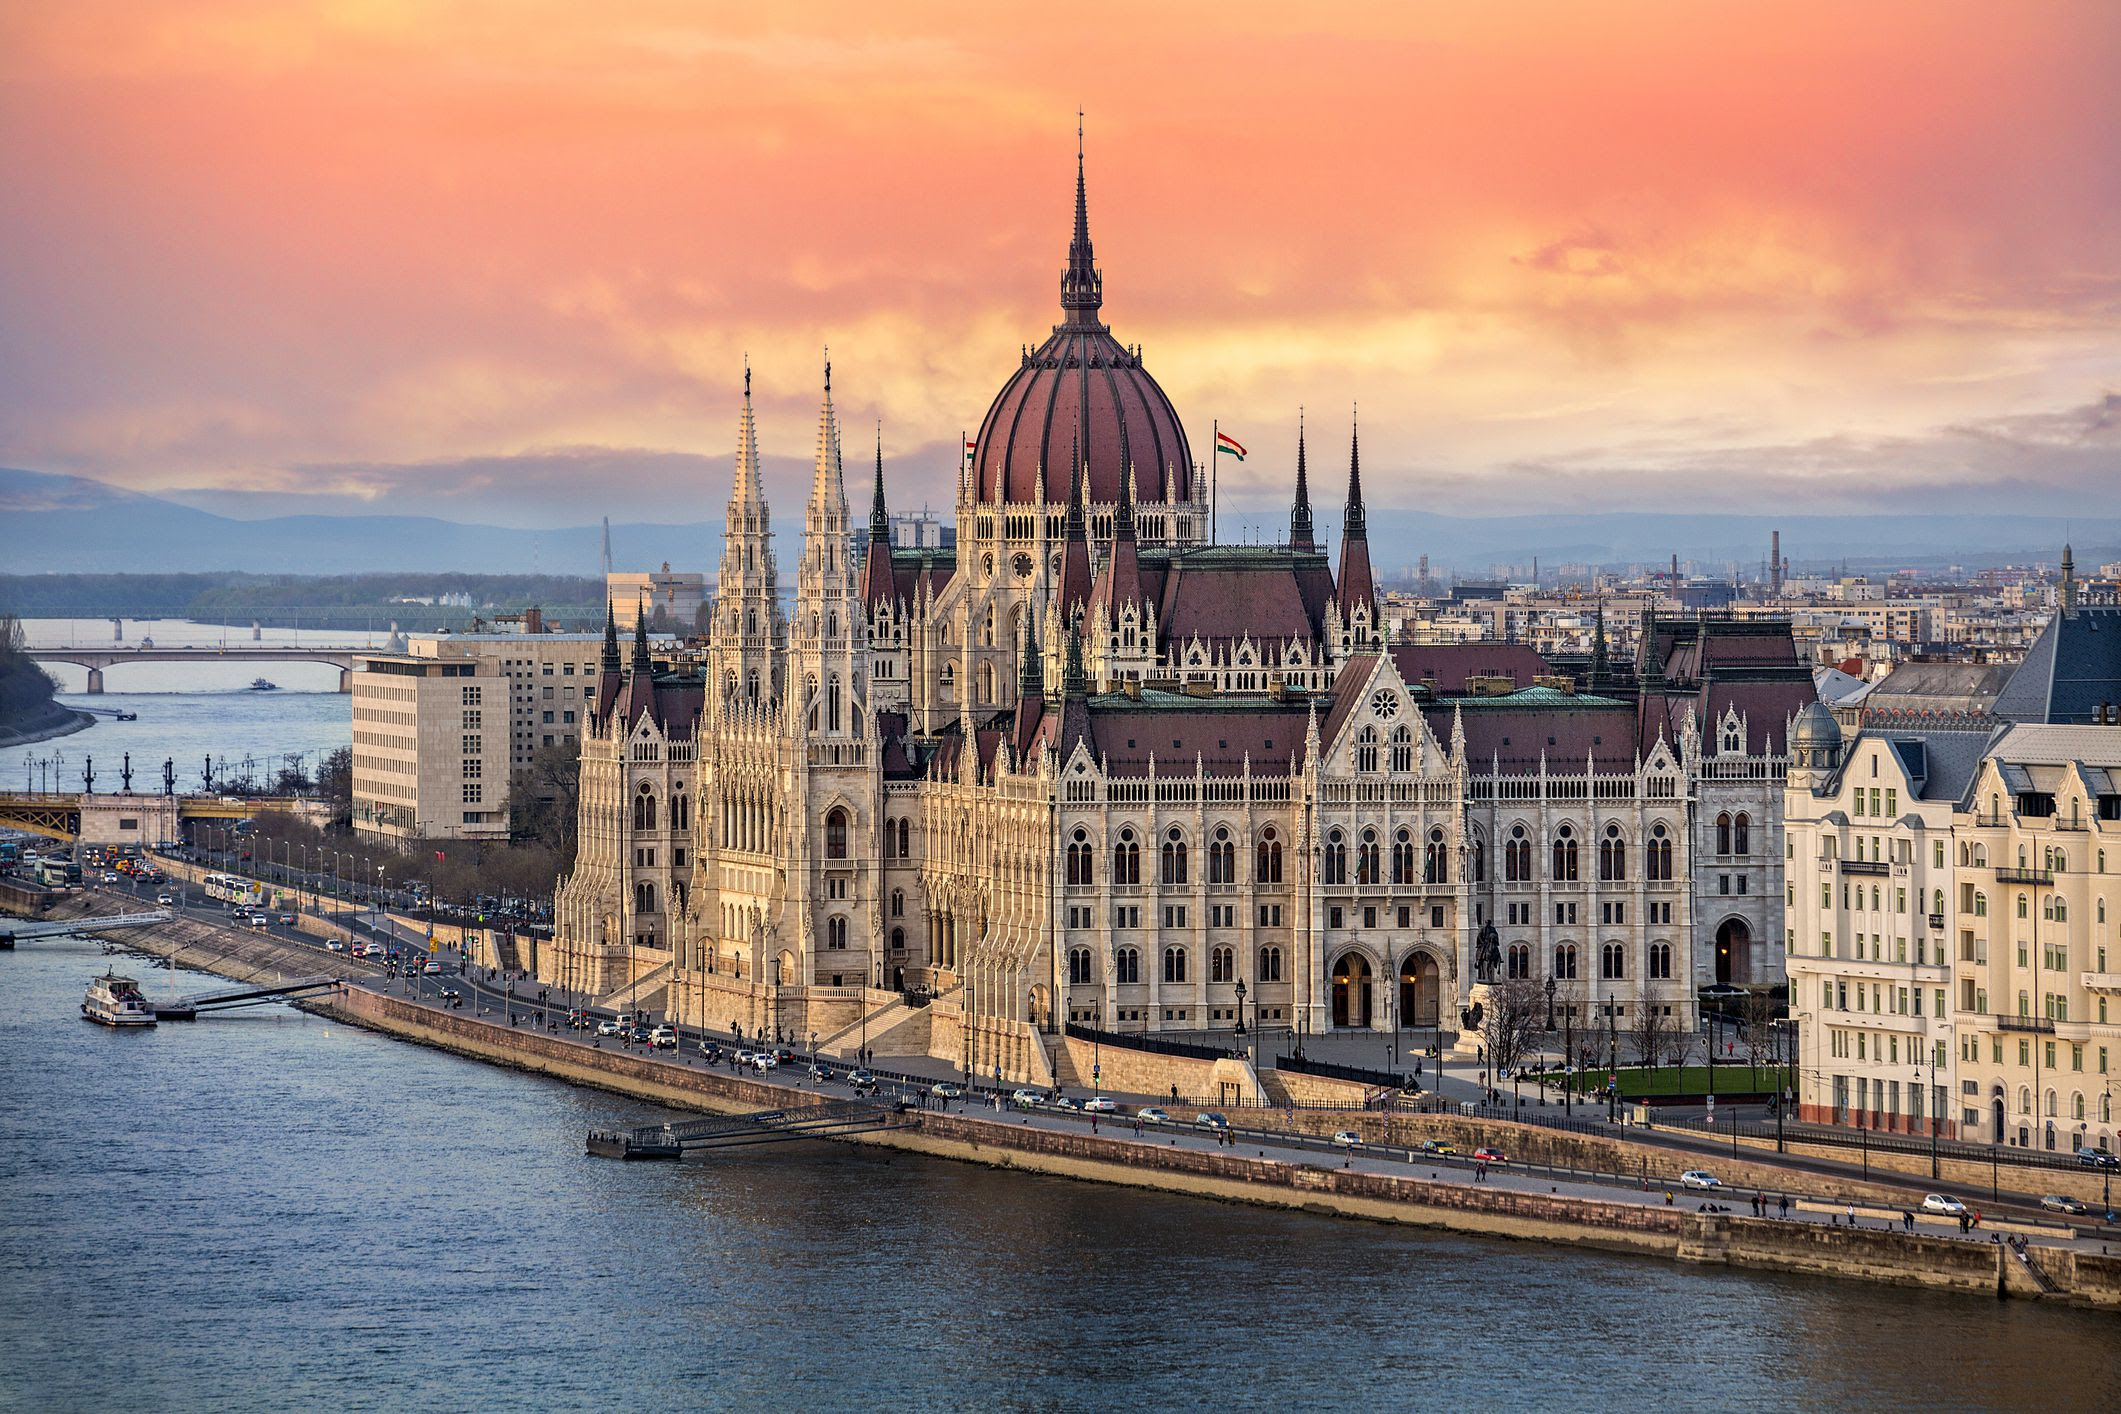 https://campaign-image.com/zohocampaigns/427042000023829006_zc_v8_the_hungarian_parliament_on_the_danube_river_at_sunset_in_budapest__hungary_945207010_23afbc9012d54bc4bb7c8a1f8c90075b.jpg